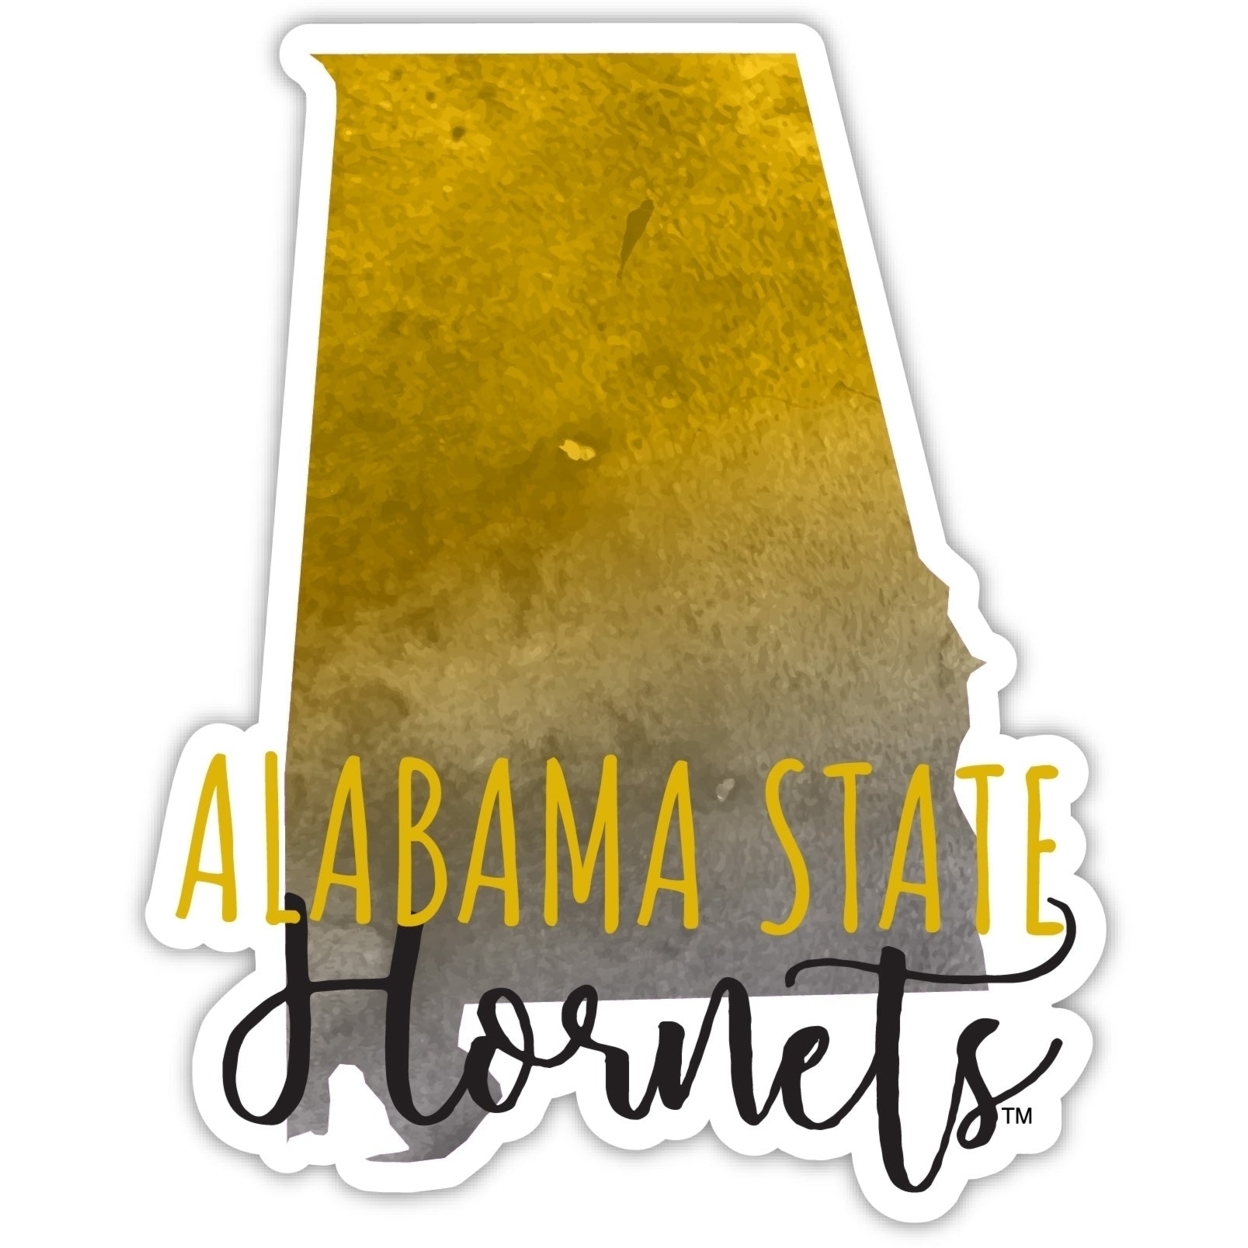 Alabama State University Watercolor State Die Cut Decal 4-Inch